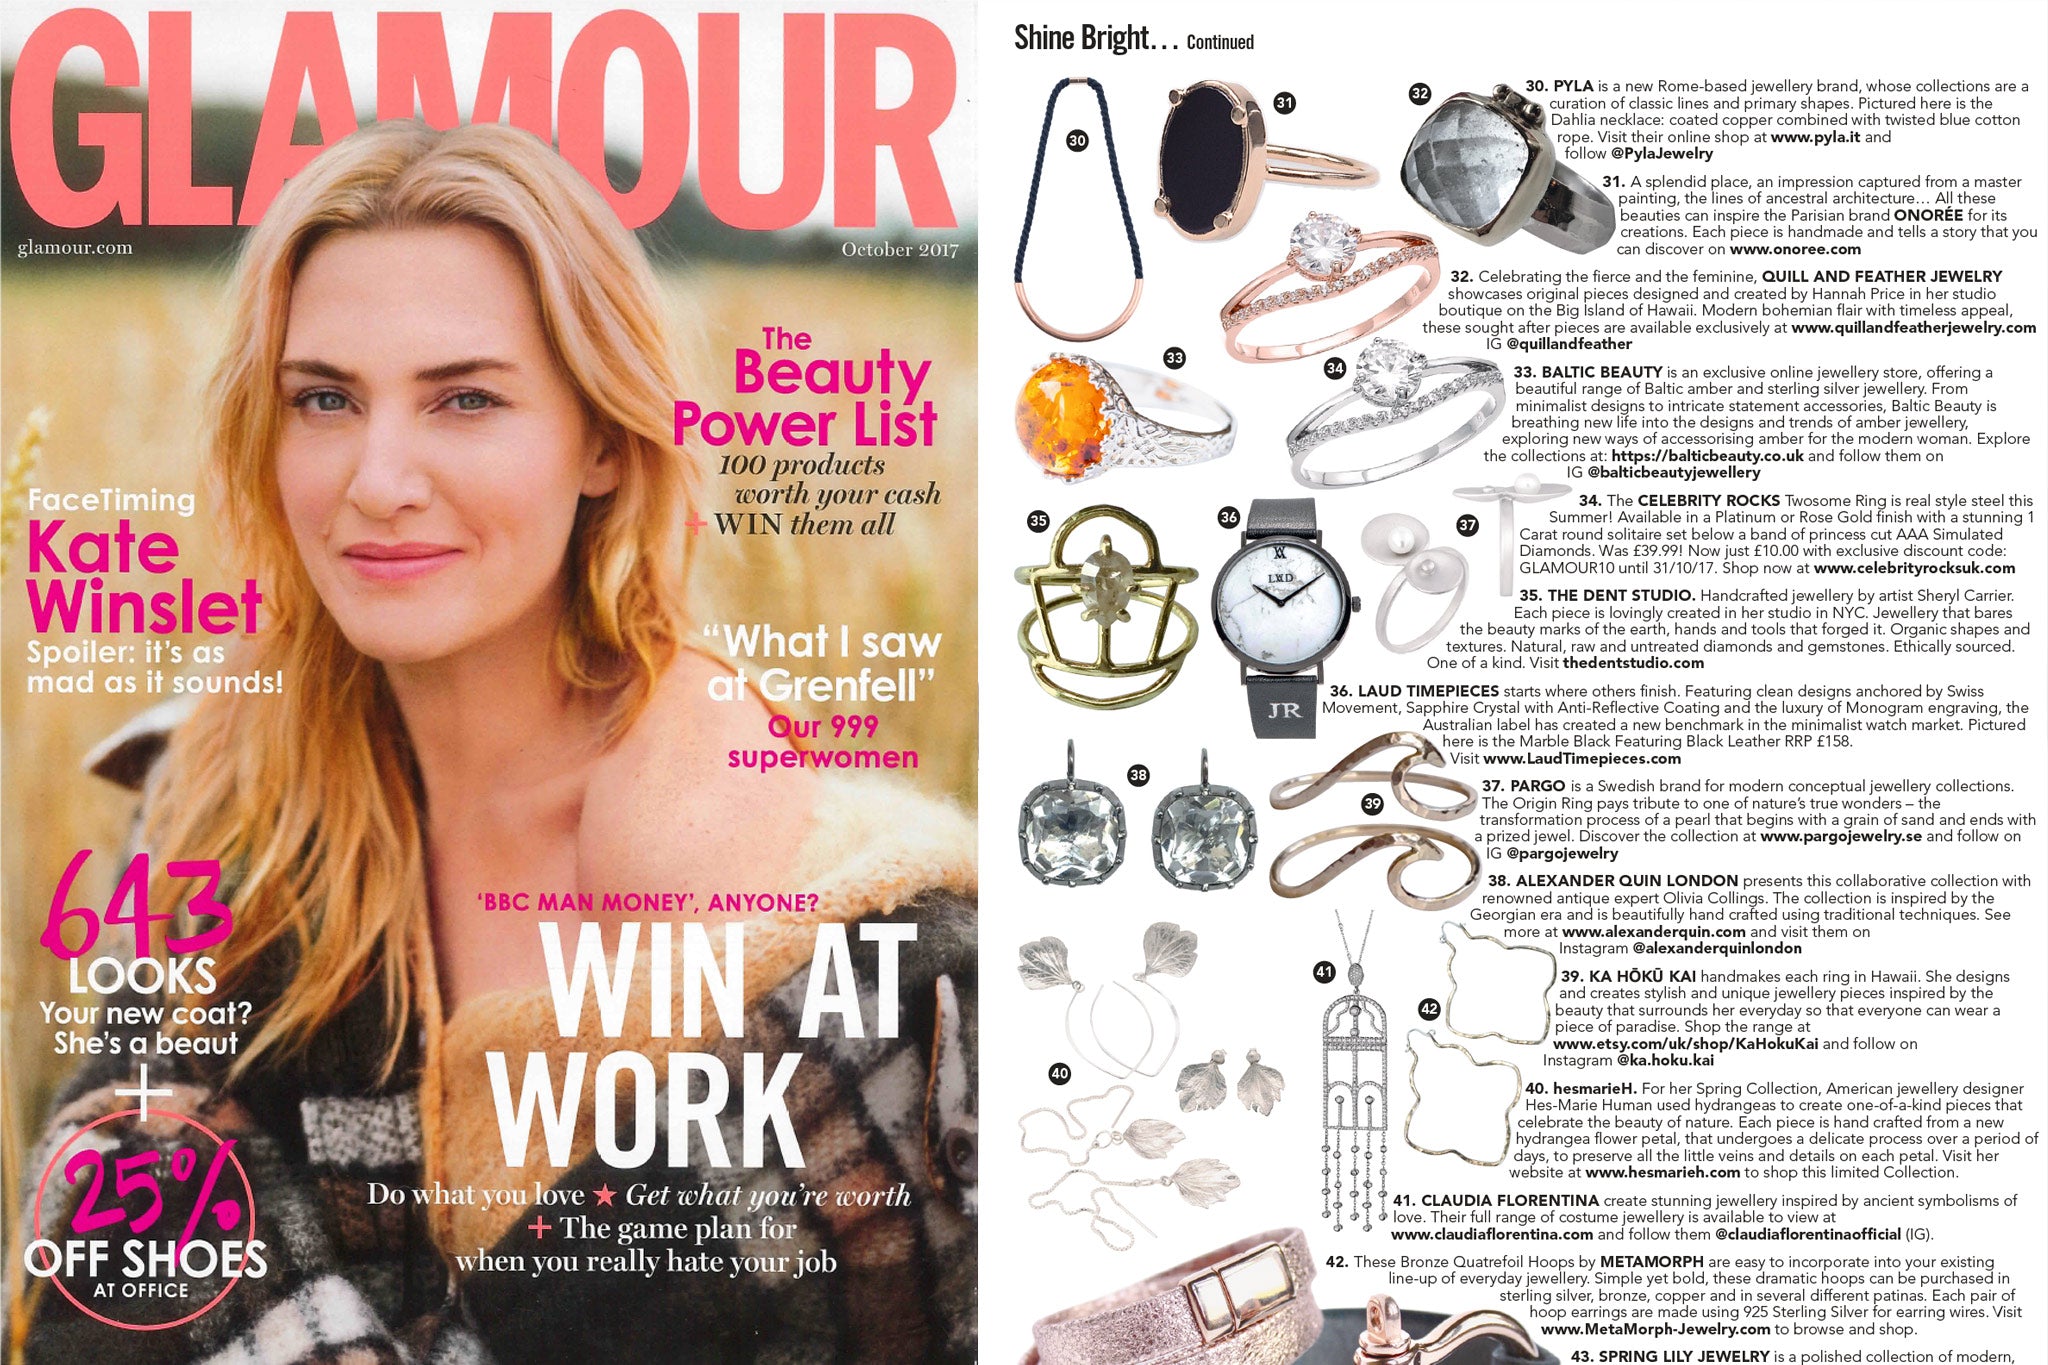 Our stunning Baltic Amber ring was featured in Glamour magazine